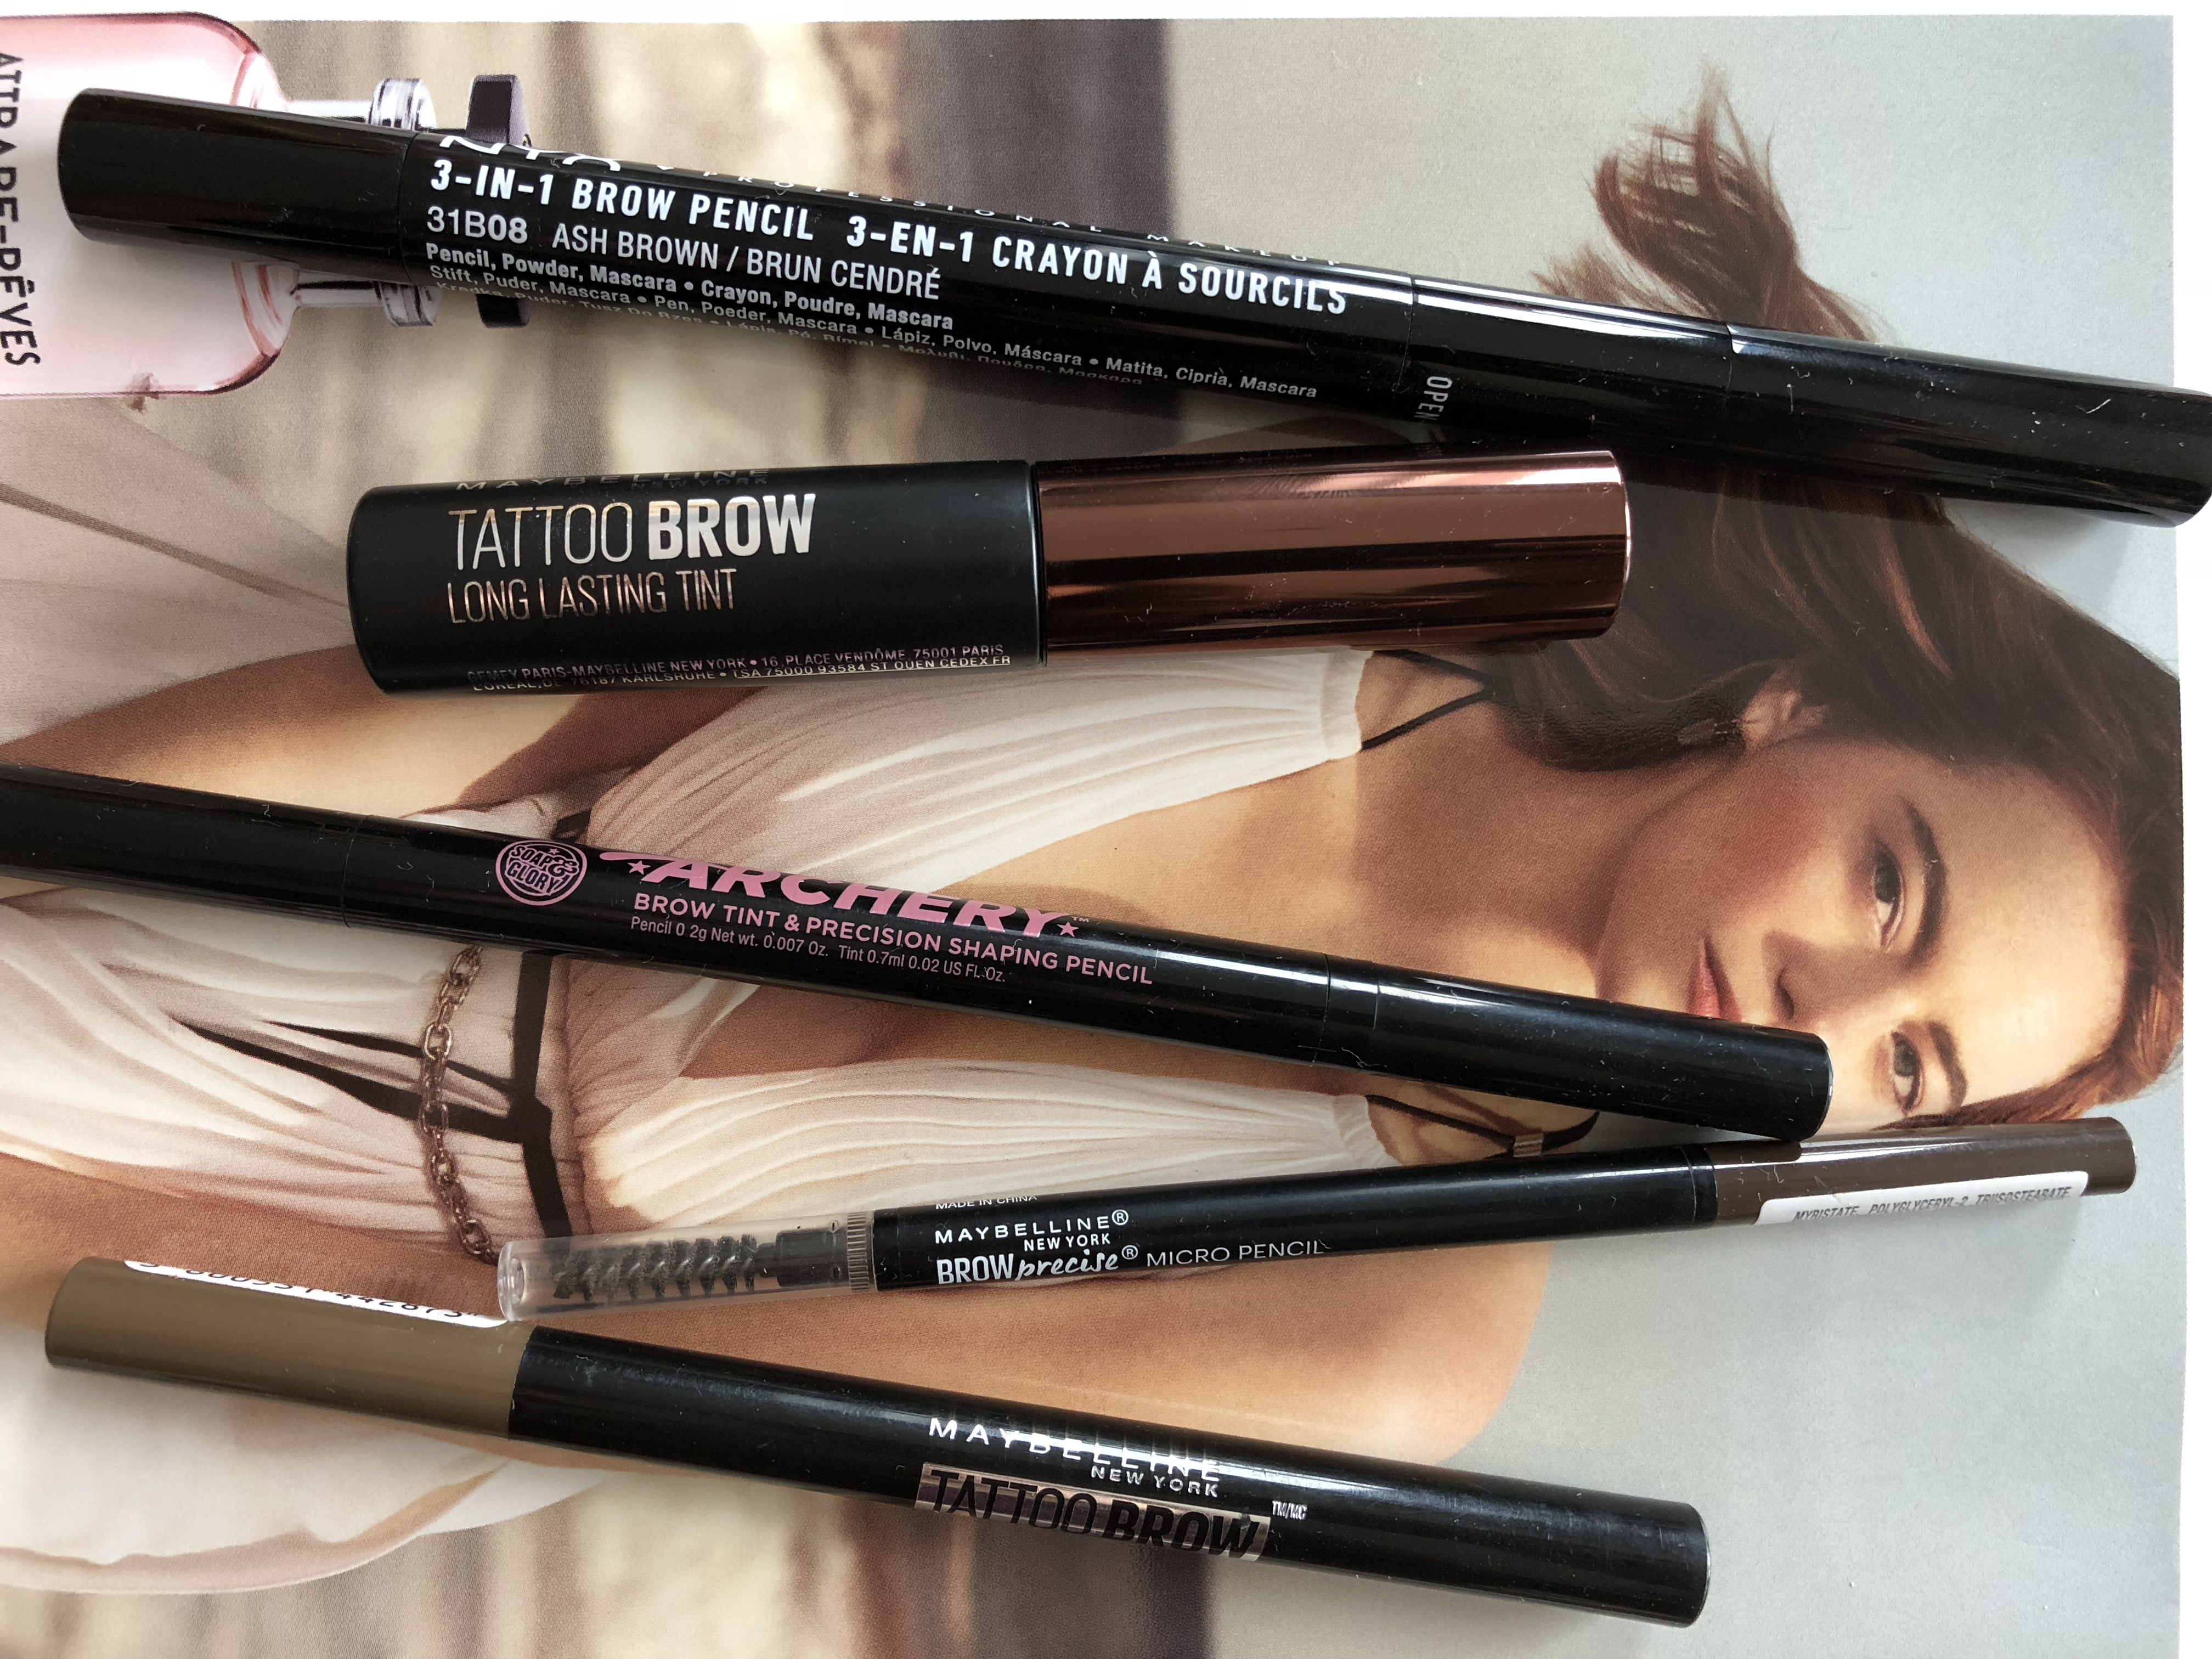 Product Up - LONG-LASTING Made A BROW Reviews, Makeup Beauty OF Videos REVIEW BEST Lifestyle Tutorial AFFORDABLE, PRODUCTS THE - Face &